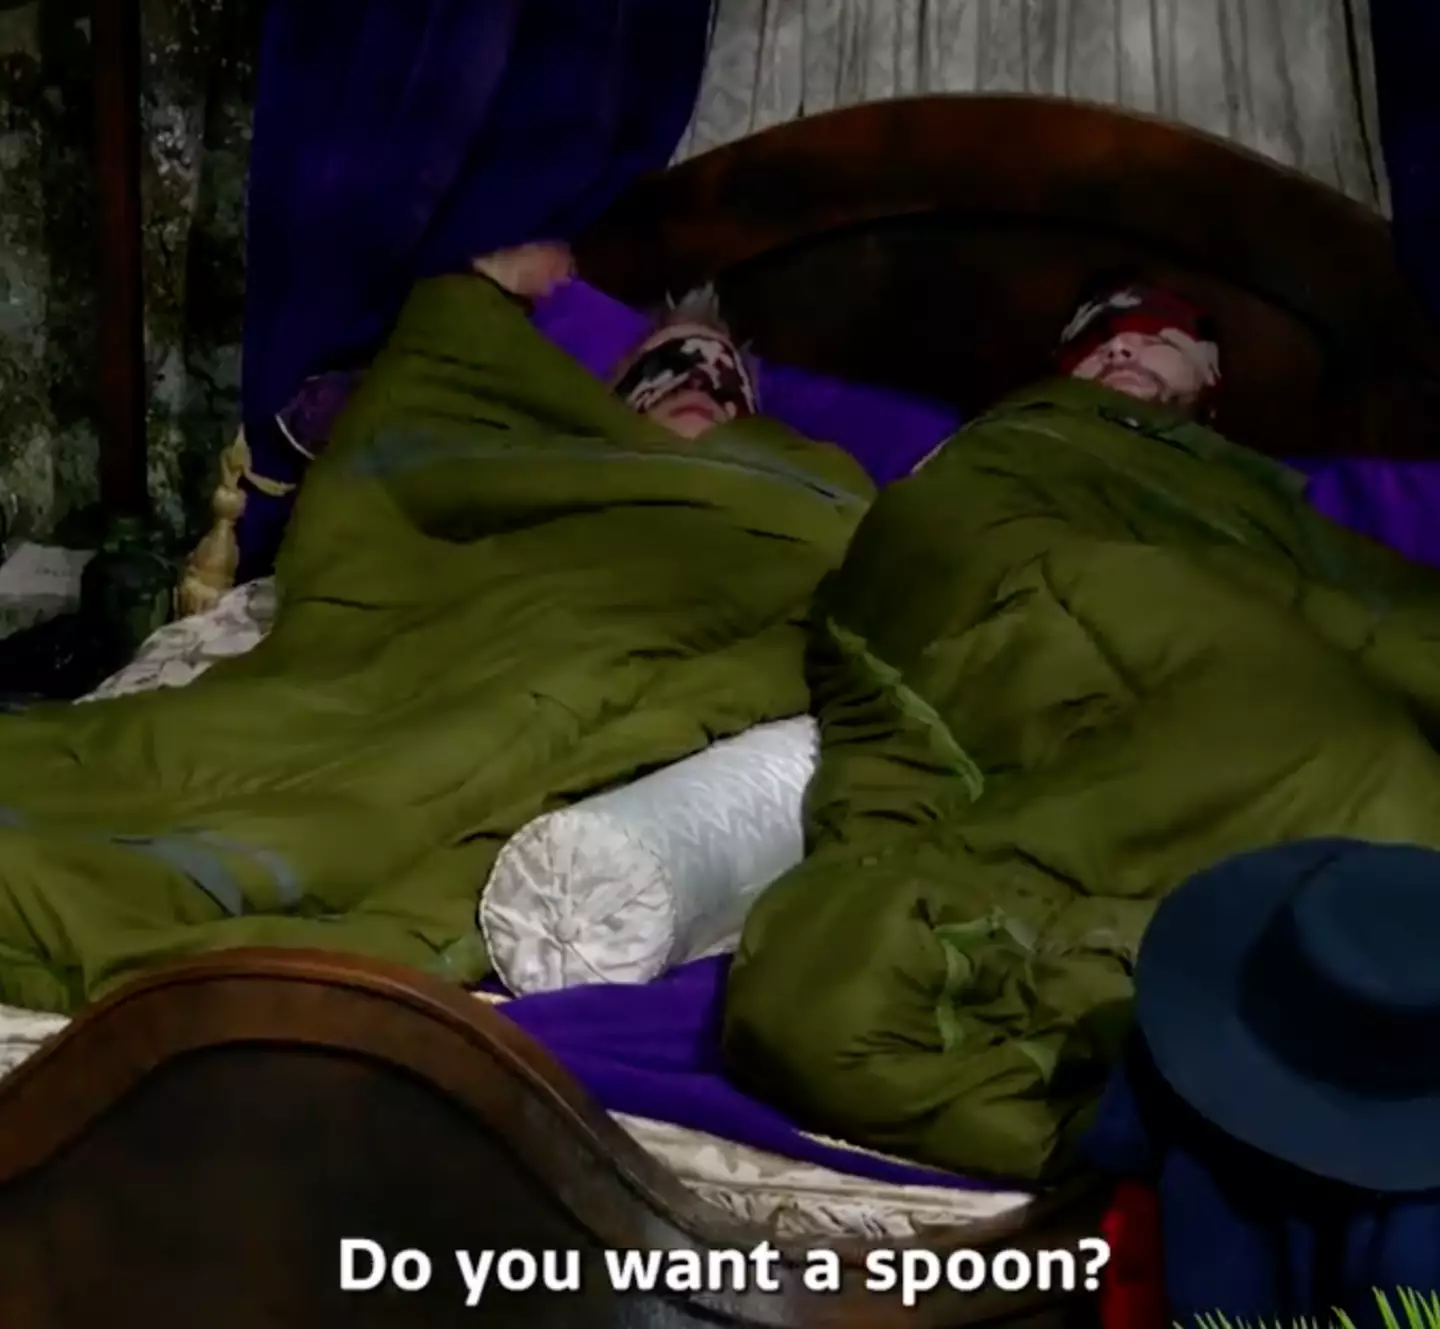 Danny asked David for a spoon (